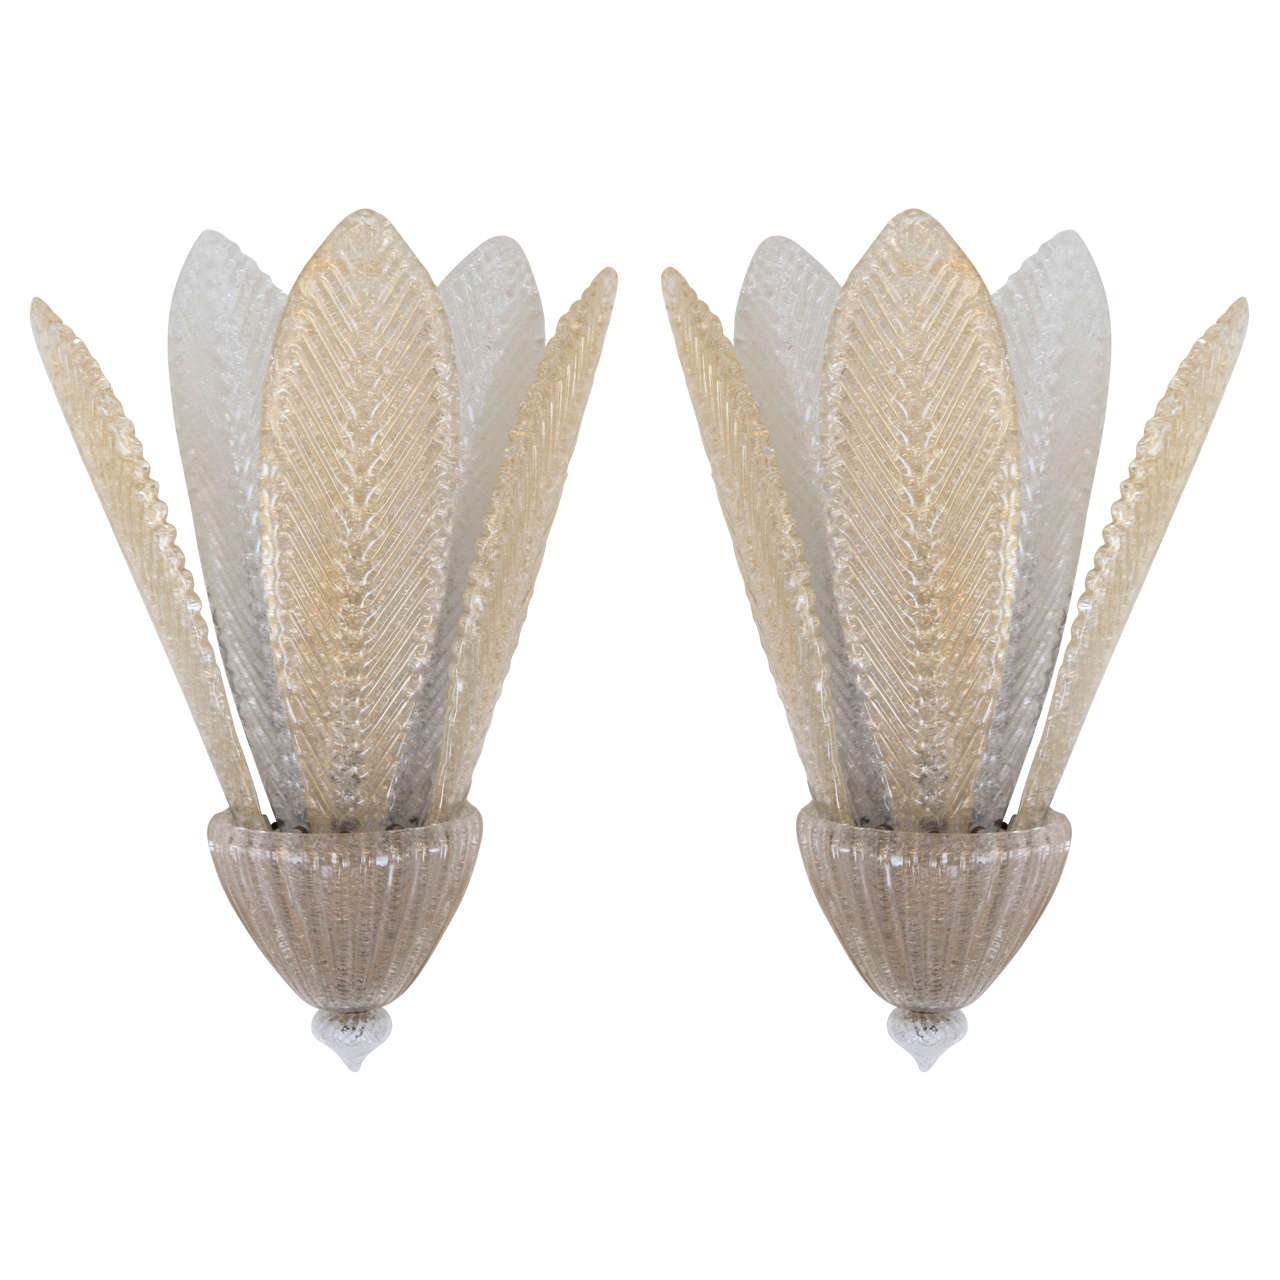 Midcentury Pair of Italian Murano Wall Sconces with Leaf Motif